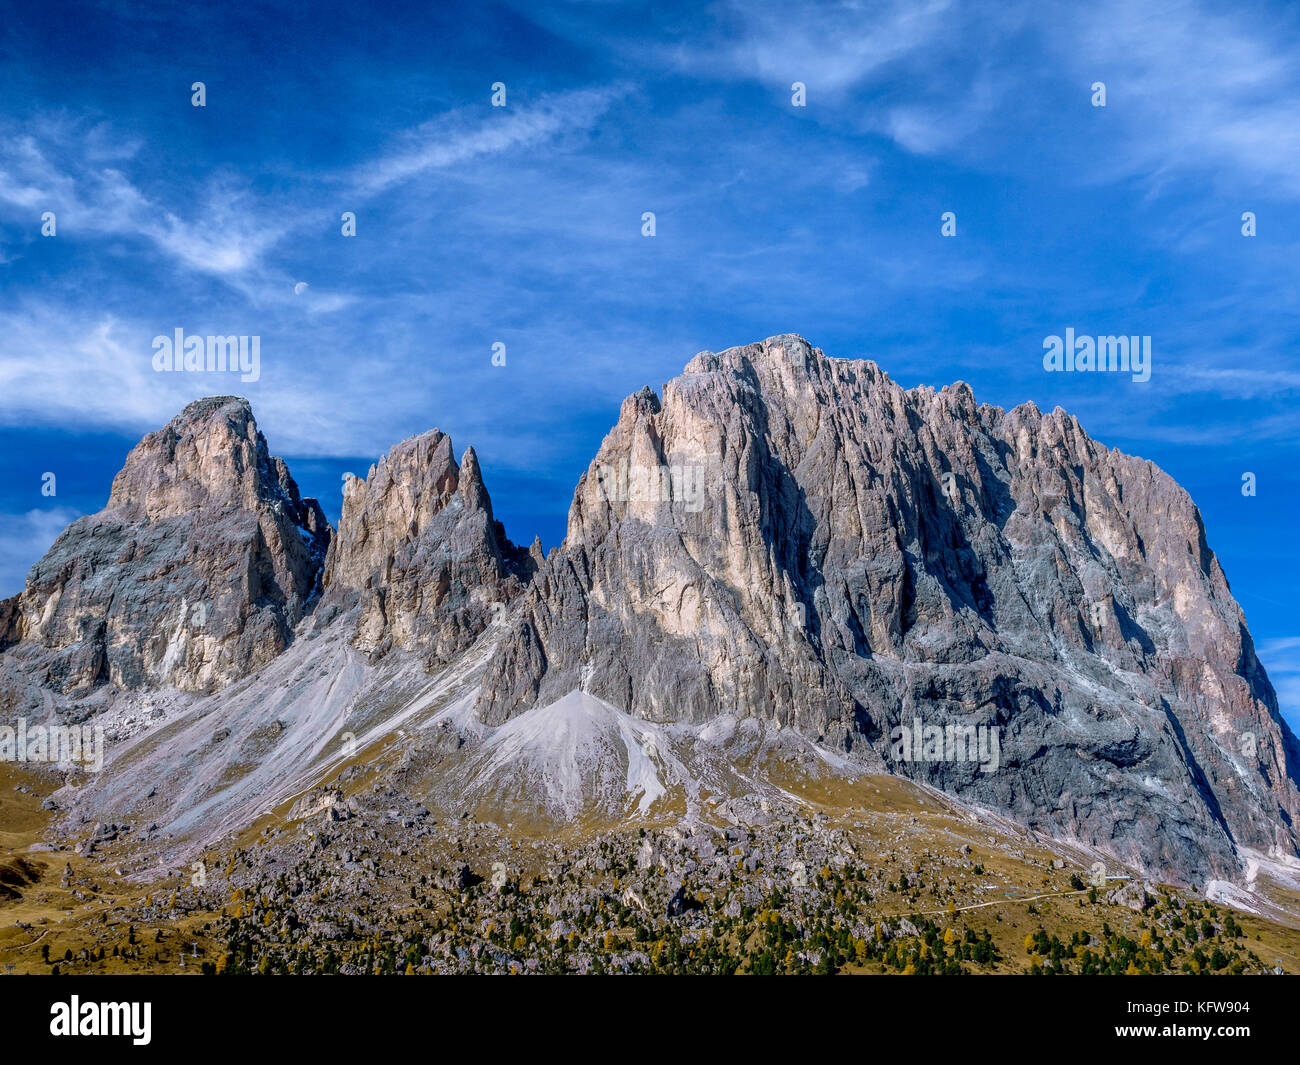 Mountain scenery Langkofel Group, Grohmannspitze Mountain, left, Fuenffingerspitze or Five Finger Peak, centre, Langkofel Mountain, right, summit of S Stock Photo